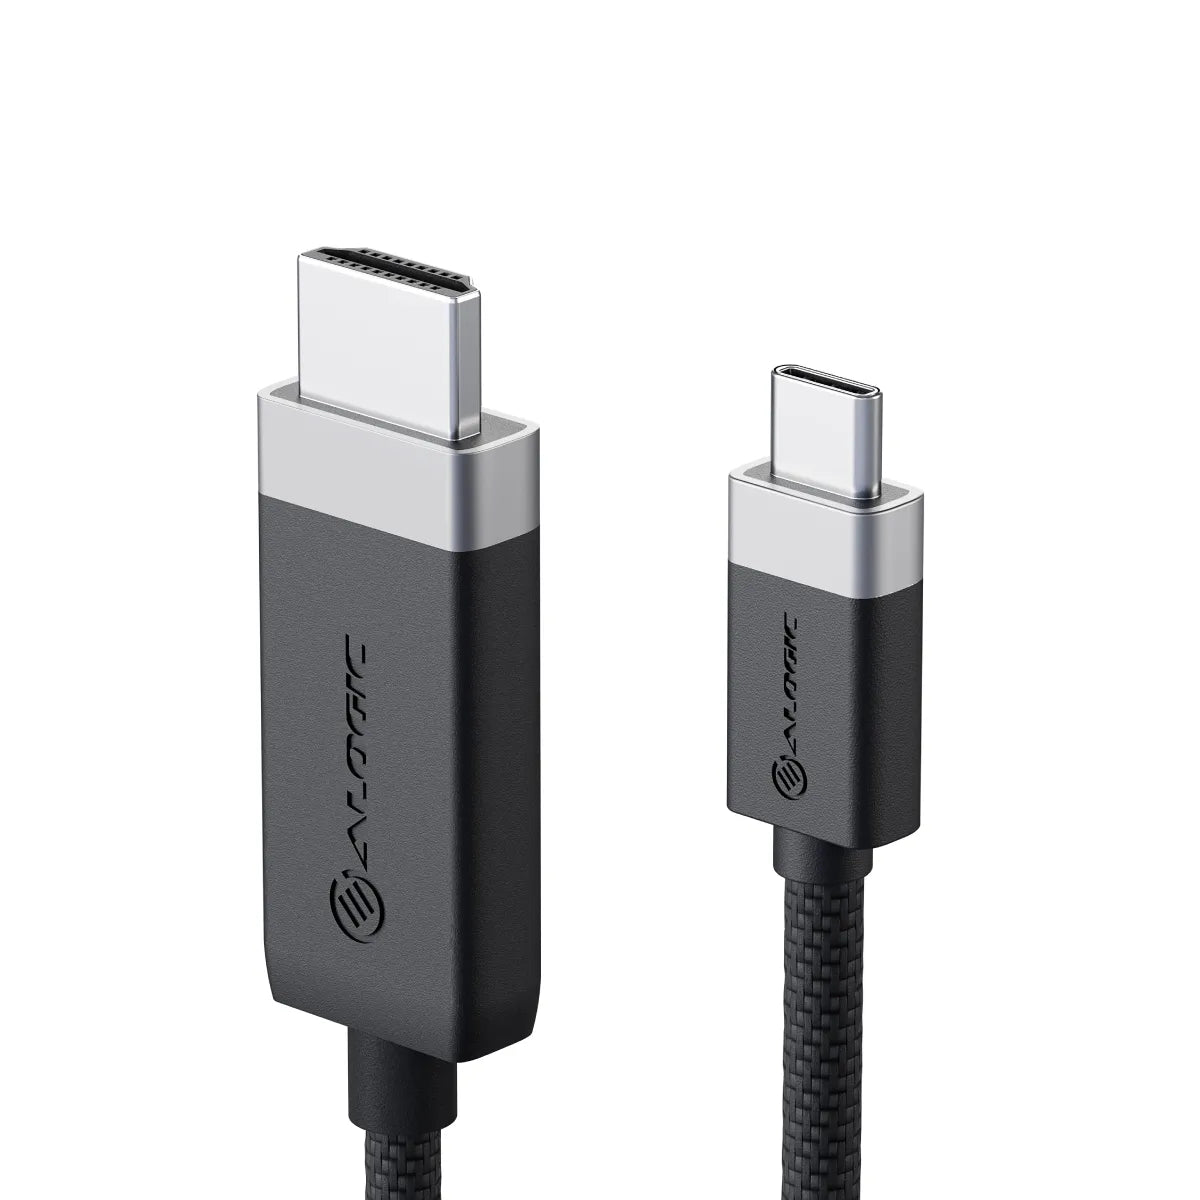 fusion-usb-c-to-hdmi-cable_1